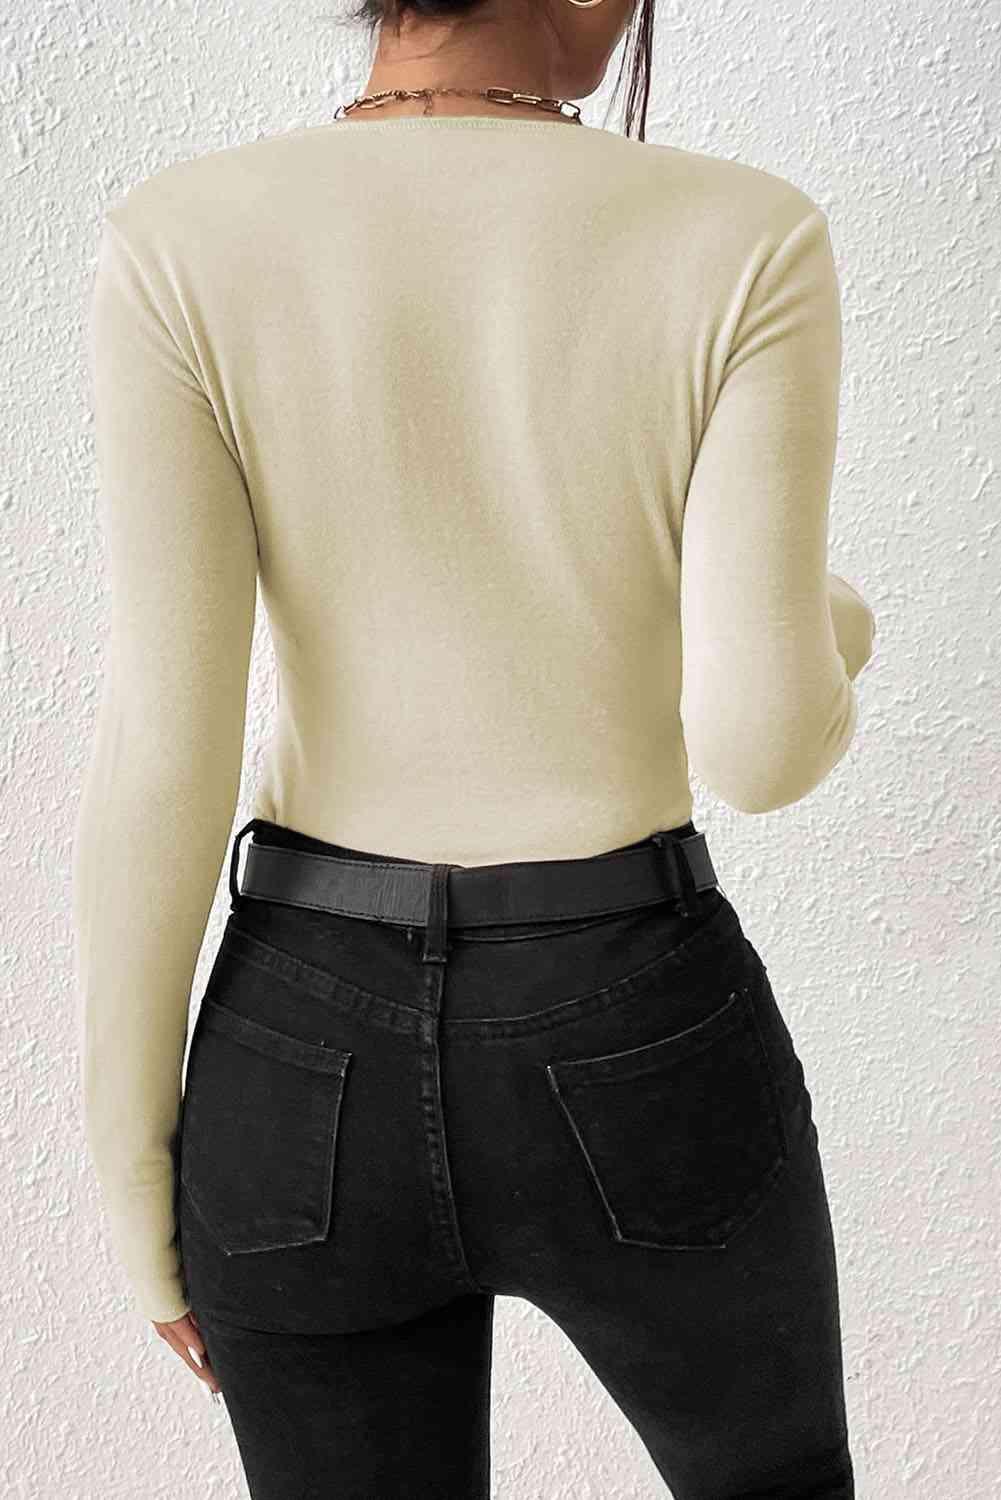 a woman wearing a white sweater and black jeans